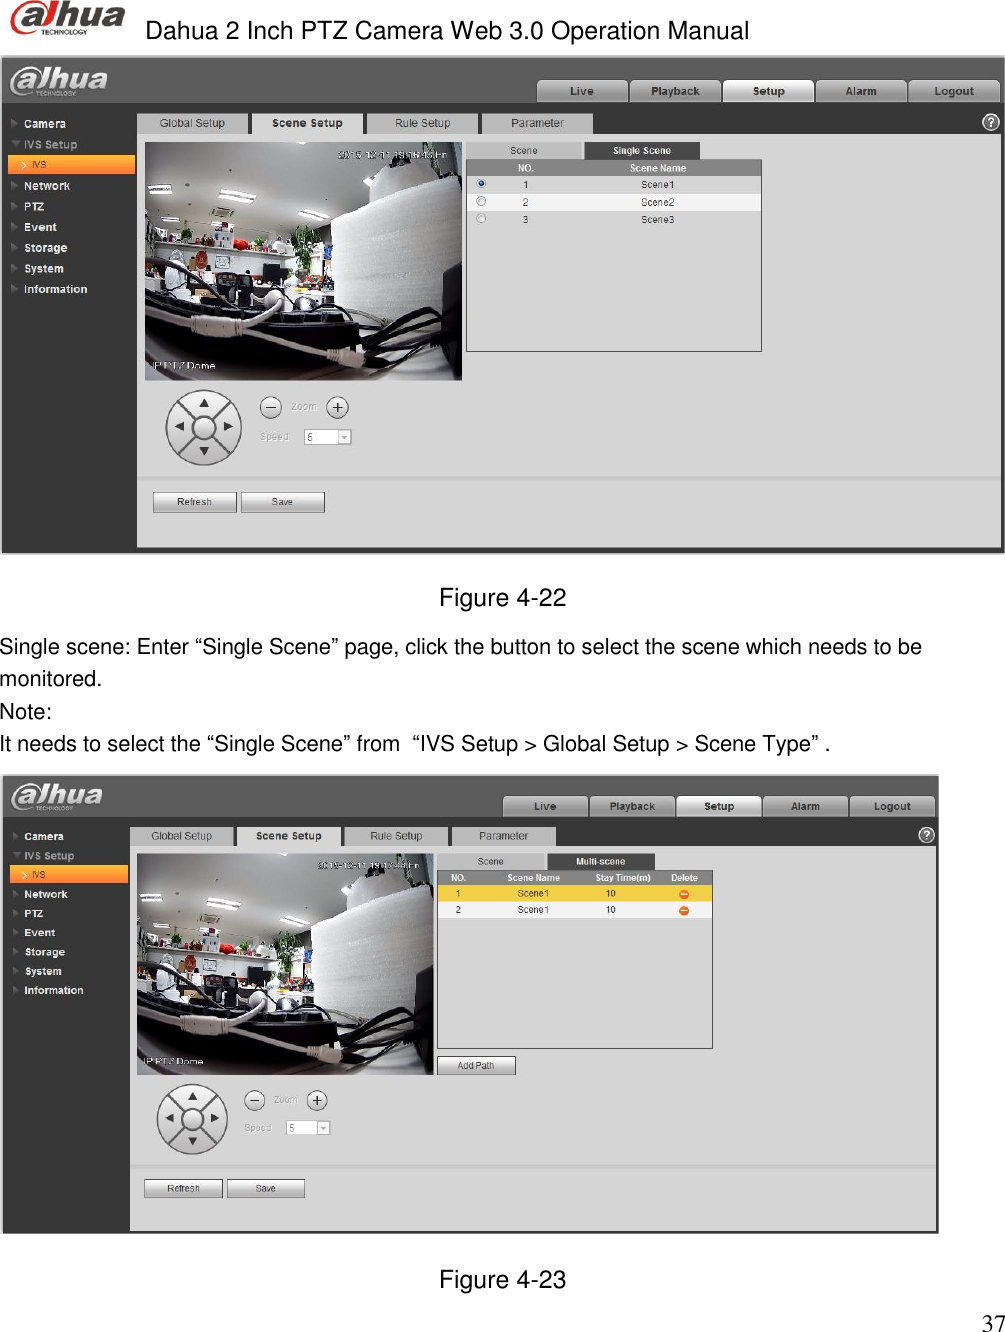  Dahua 2 Inch PTZ Camera Web 3.0 Operation Manual                                                                             37  Figure 4-22 Single scene: Enter “Single Scene” page, click the button to select the scene which needs to be monitored.  Note:  It needs to select the “Single Scene” from  “IVS Setup &gt; Global Setup &gt; Scene Type” .  Figure 4-23 